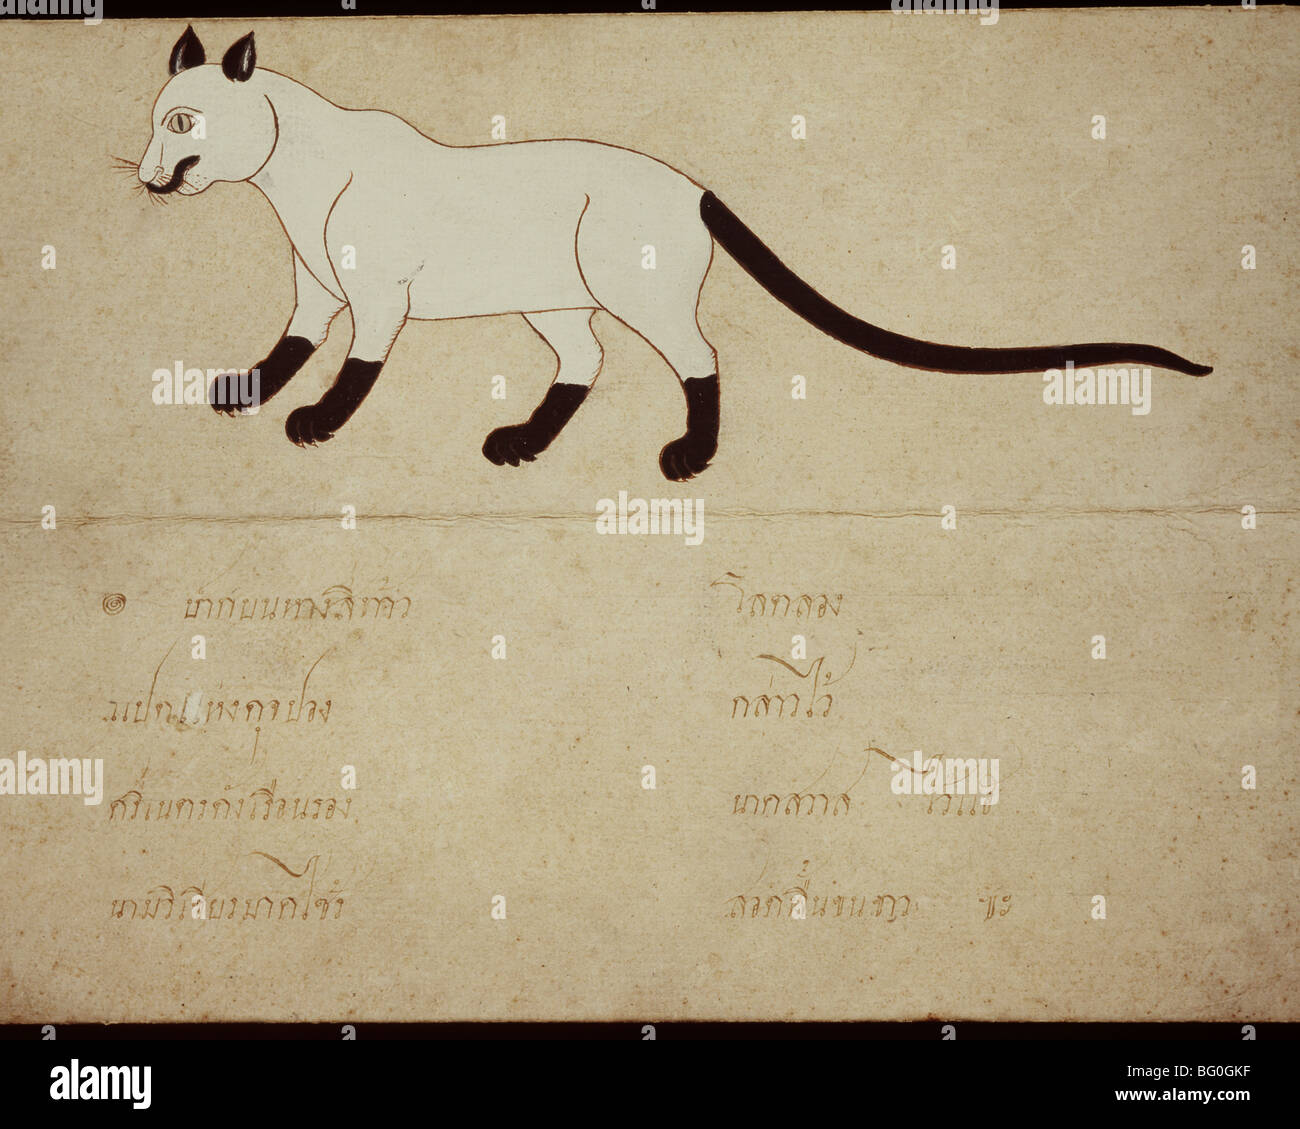 Thai manuscript on Siamese cats, dating from circa 1920, Thailand, Southeast Asia, Asia Stock Photo